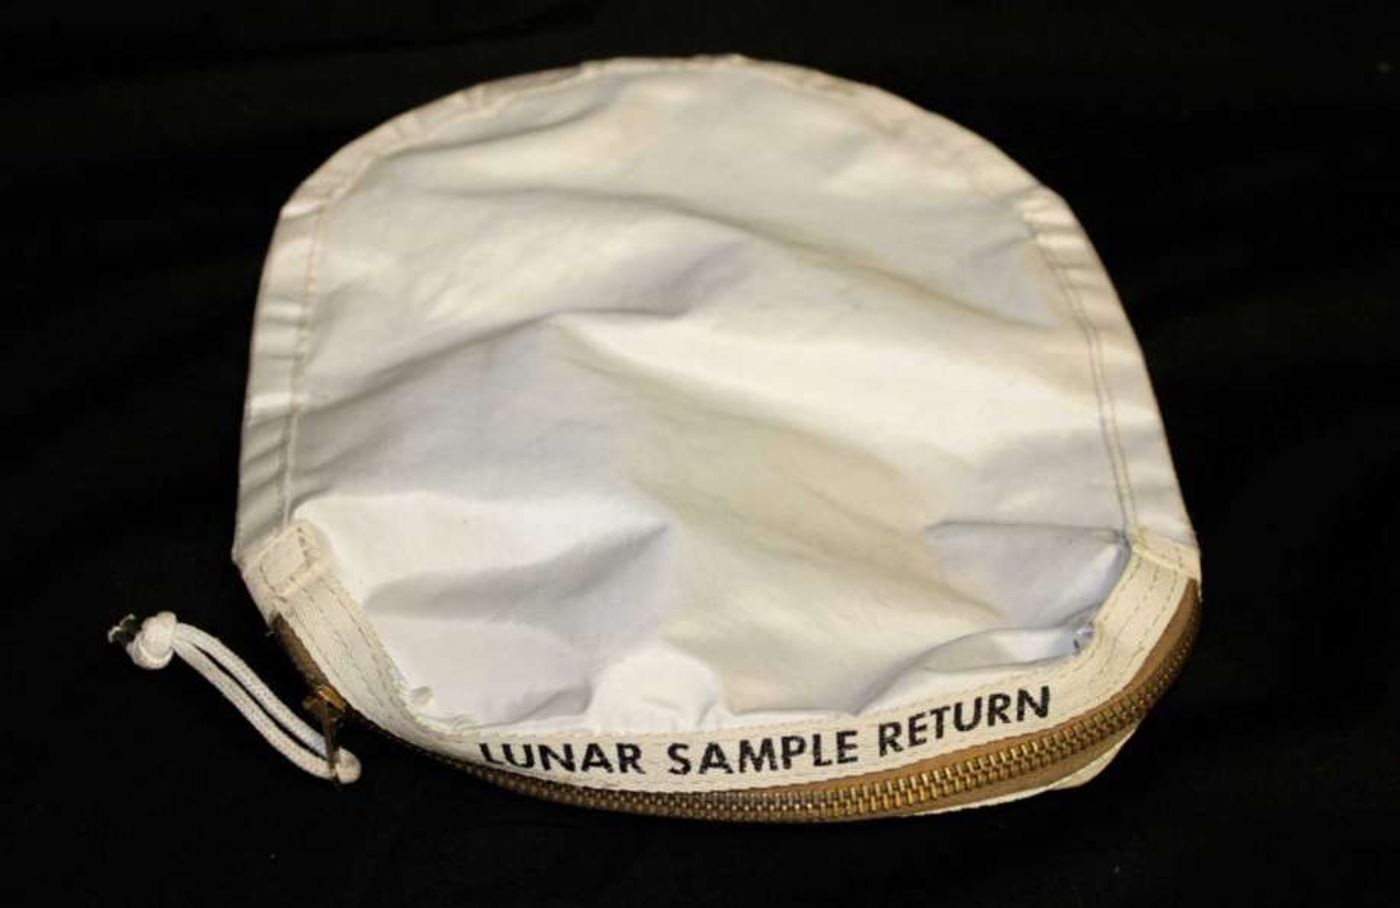 The Moon dust bag that went up for auction in New York and sold for $1.8M.